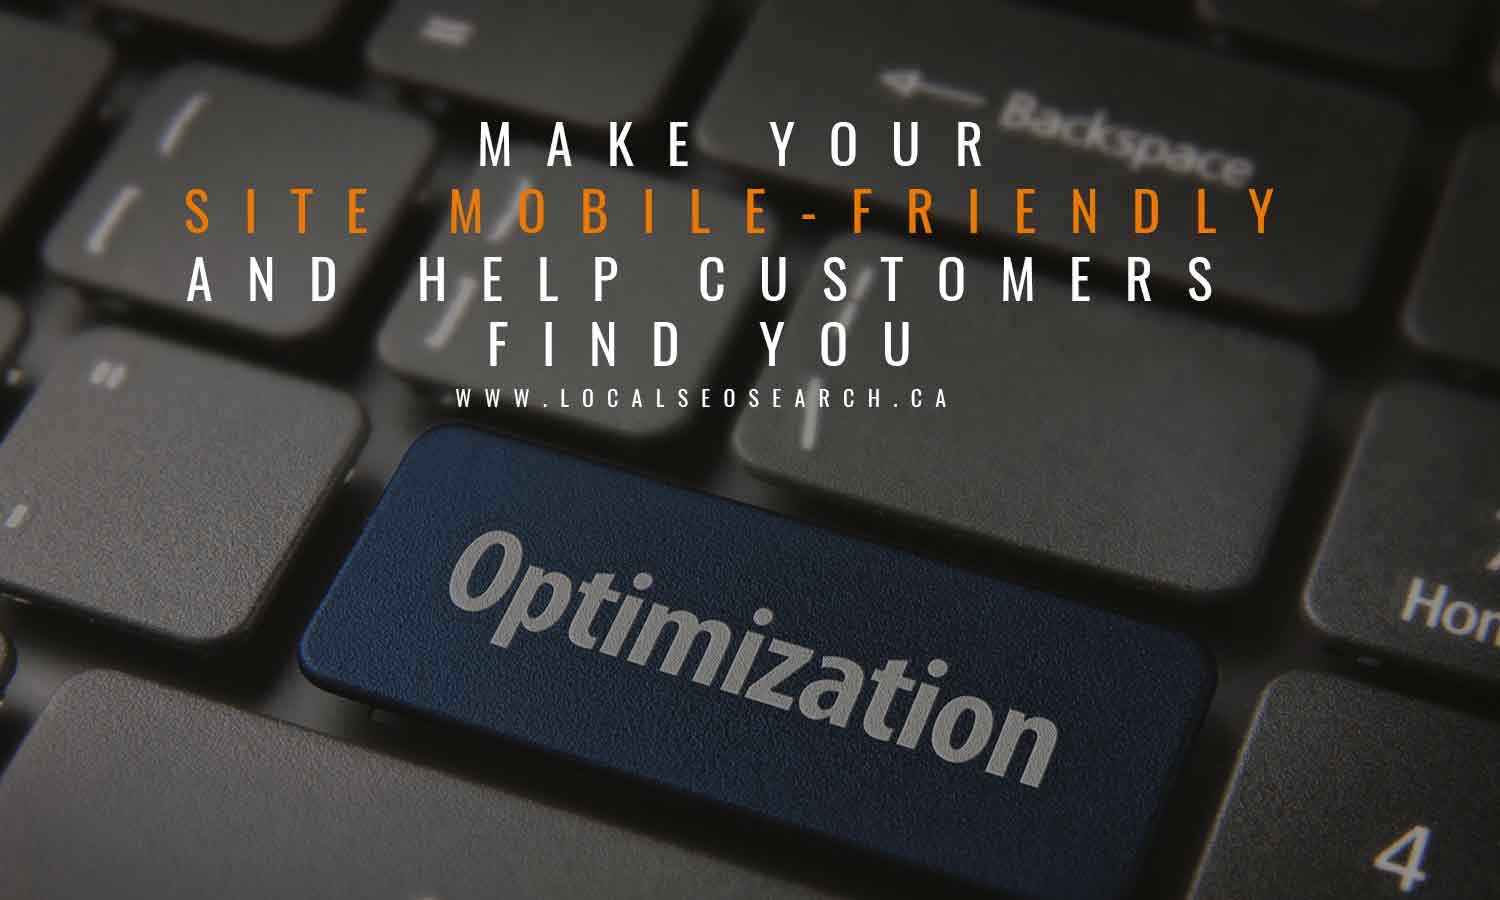 Make-your-site-mobile-friendly-and-help-customers-find-you